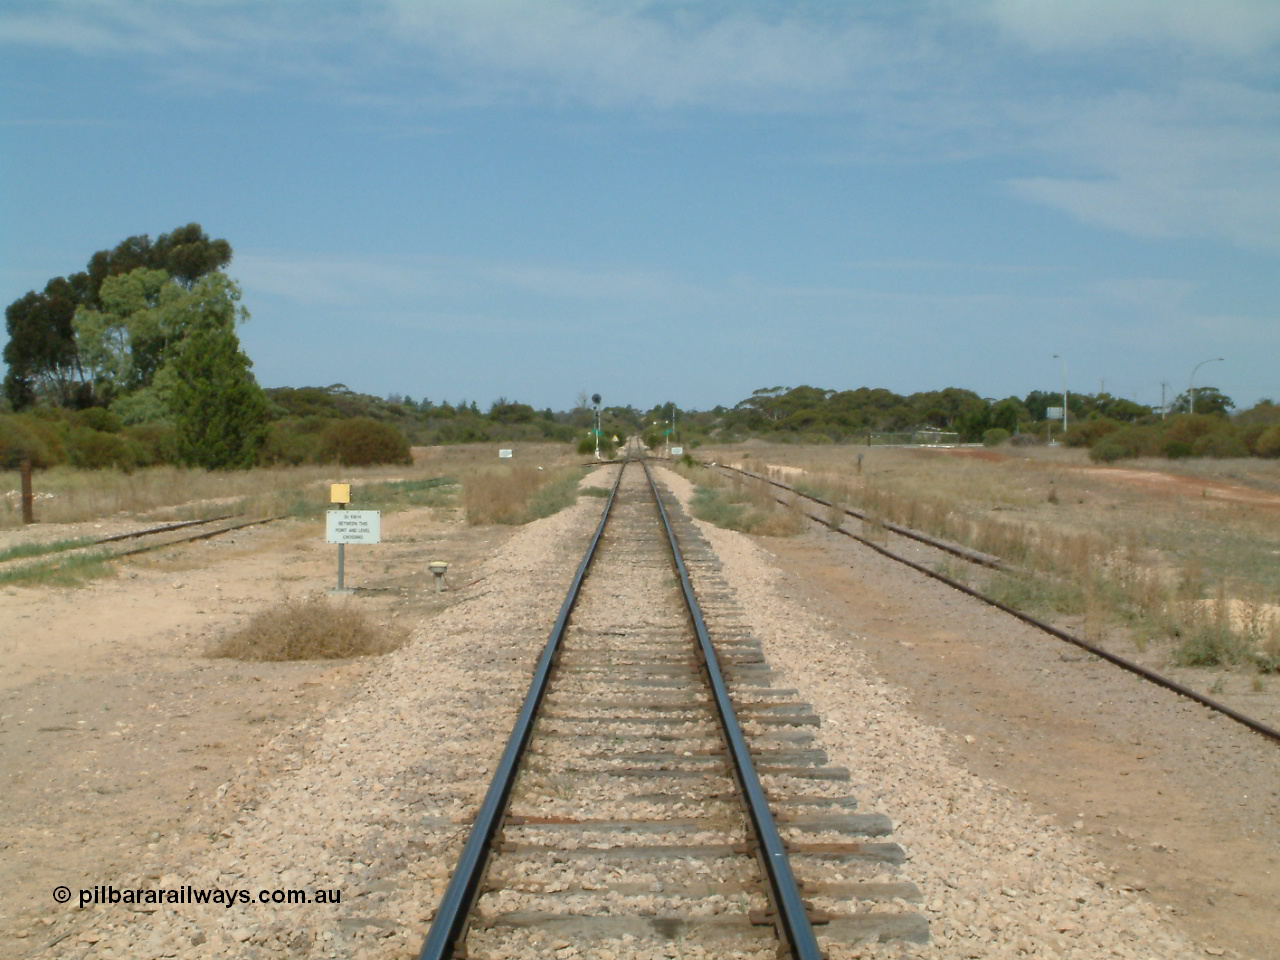 030405 140050
Kyancutta, yard view looking south along the narrow gauge mainline with the Eyre Highway grade crossing in the distance and one of only two electrically lit signals on the Eyre Peninsula Division. 5th April 2003.
